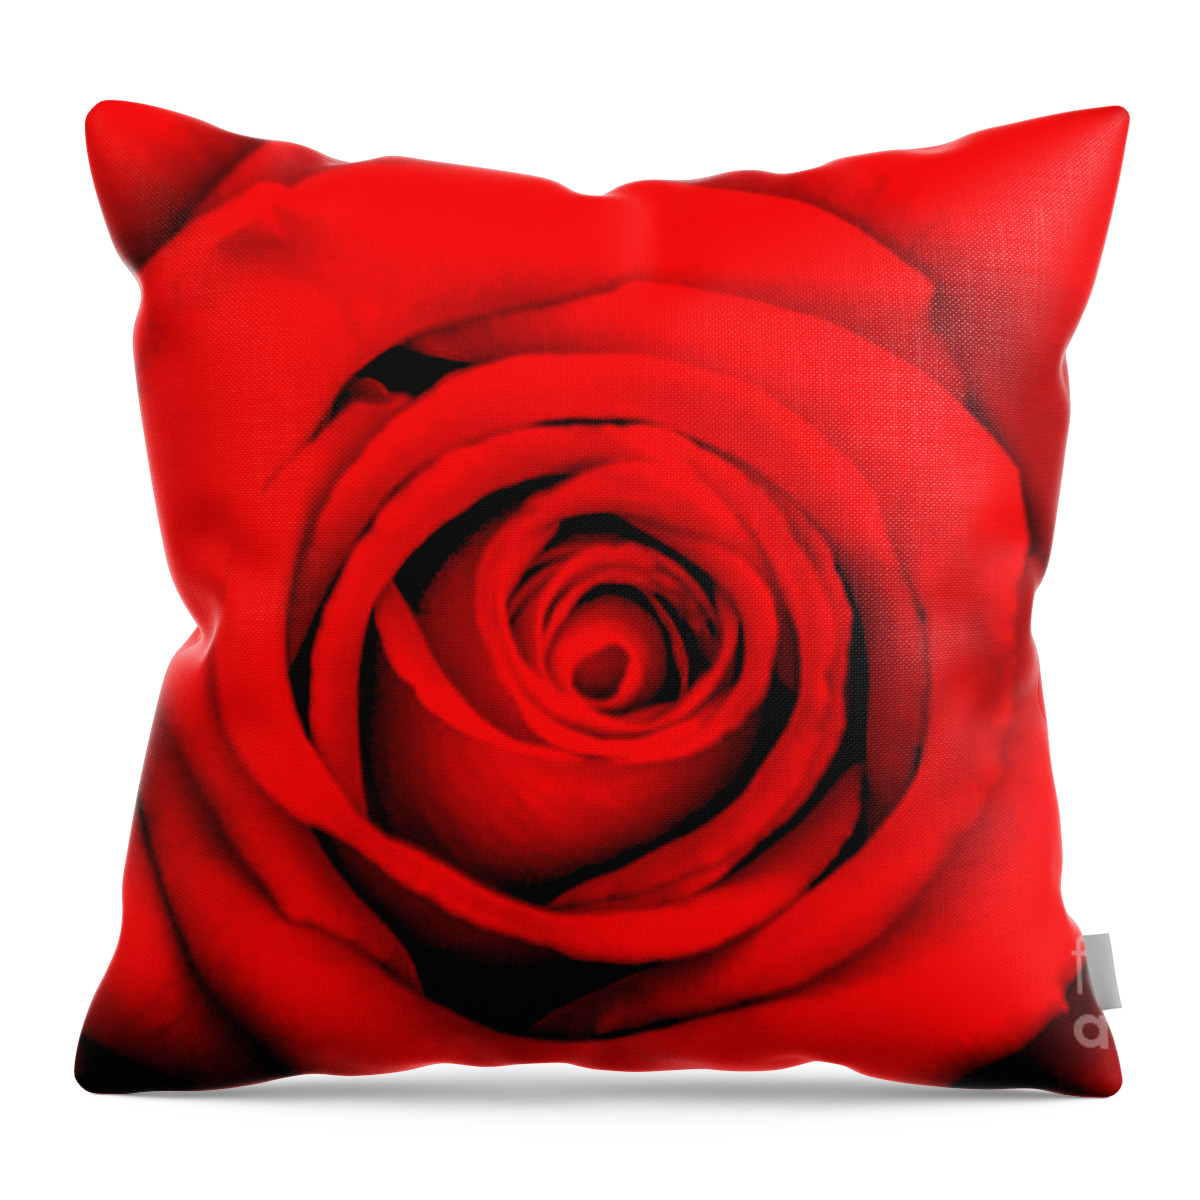 Spring Flowers Throw Pillow featuring the photograph Red Rose 1 by Az Jackson